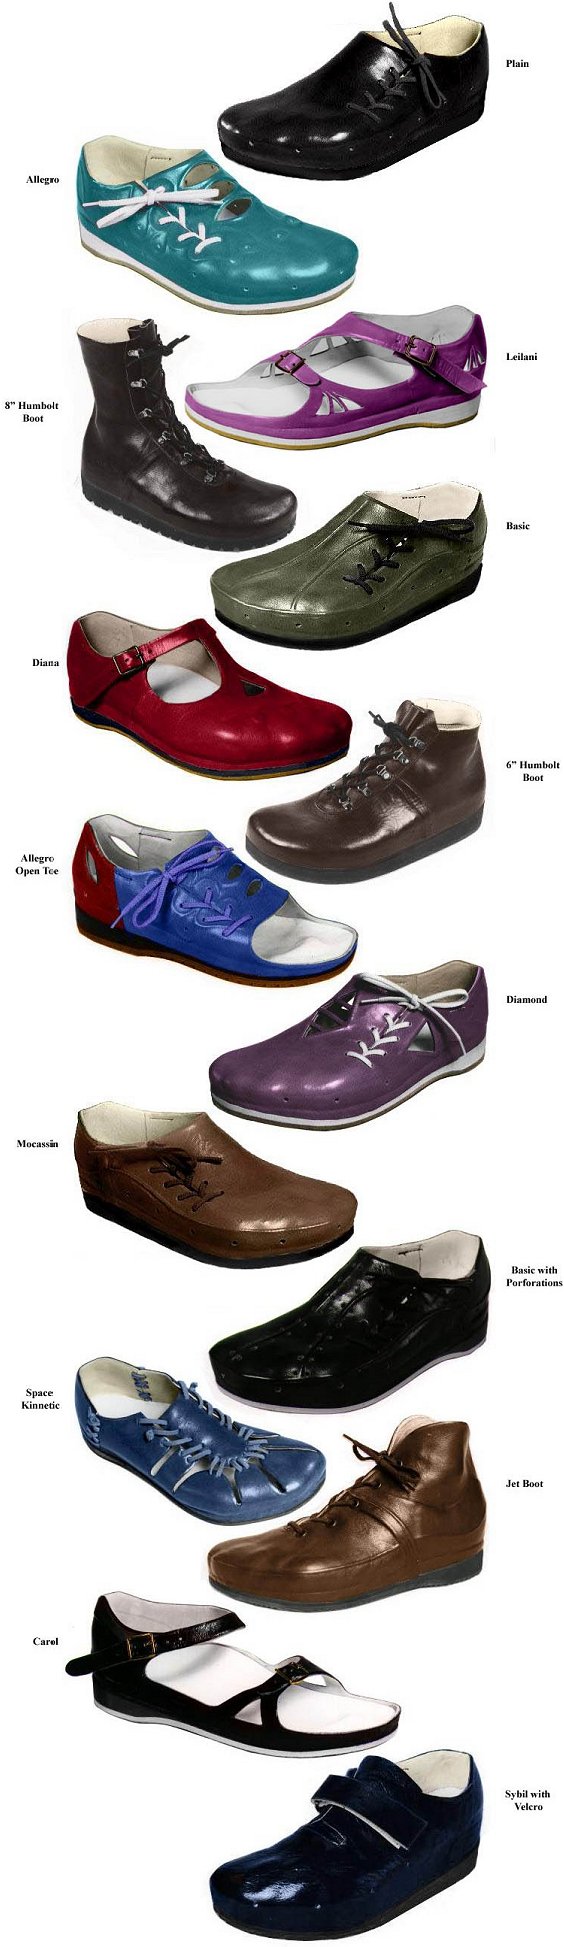 Our most popular shoe styles which include: Plain style, Allegro style, Moccasin style, Leilani style, Basic style, Diana style, BASIC Ventilated style, Carol style, HUMBOLD Low style, Space Kinetic Shoe -- Murrays Space Shoe style, Jet Boot style, Humboldt Boot High style.